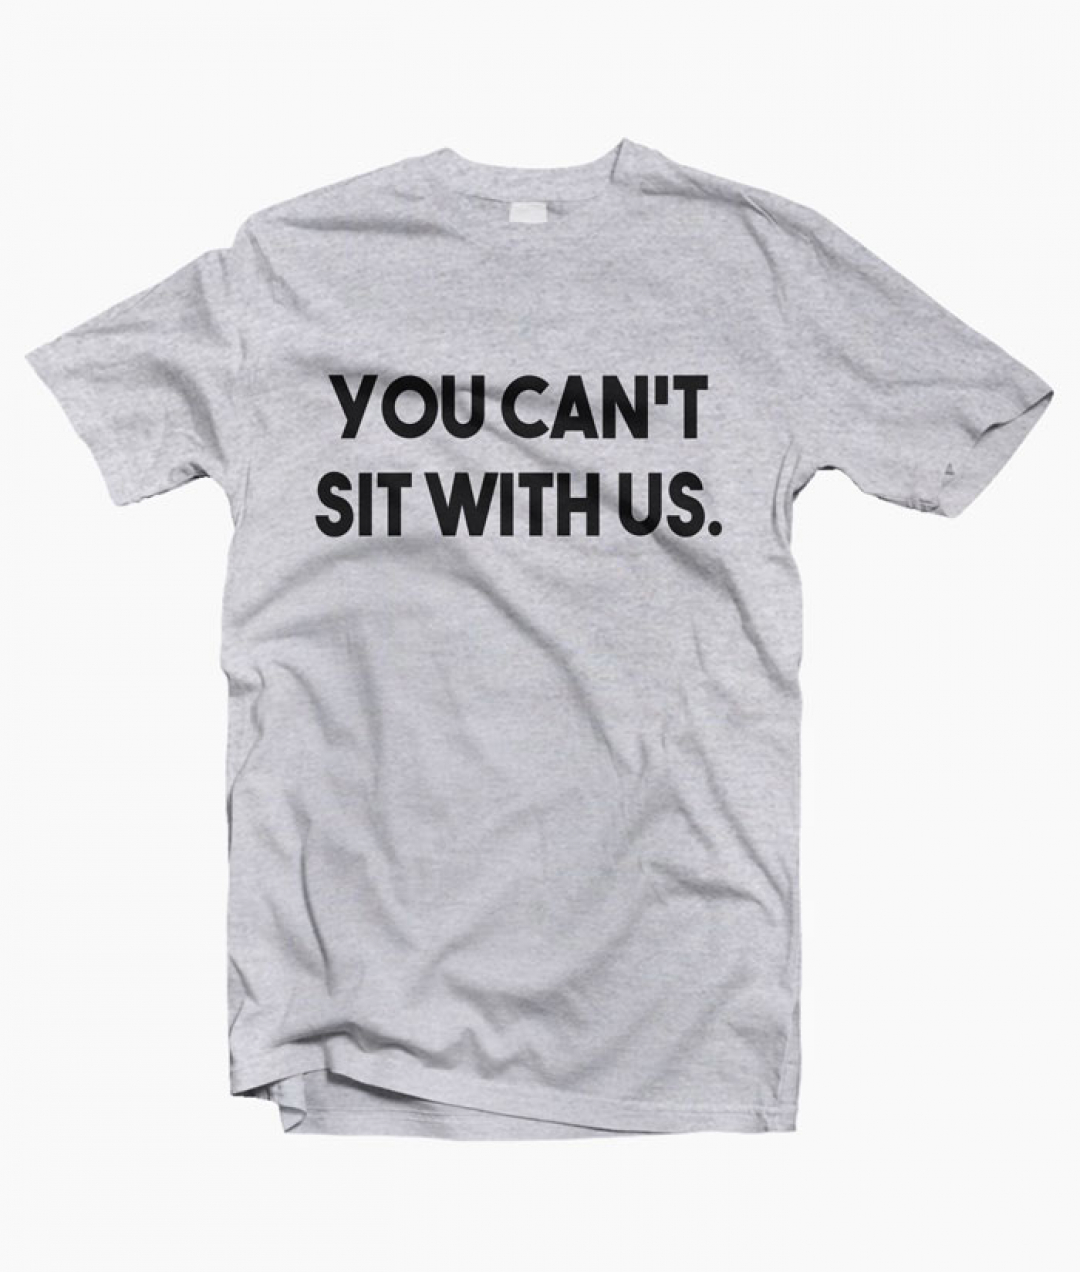 You Can't Sit With Us T Shirt Unisex Size S-M-L-XL-2XL-3XL